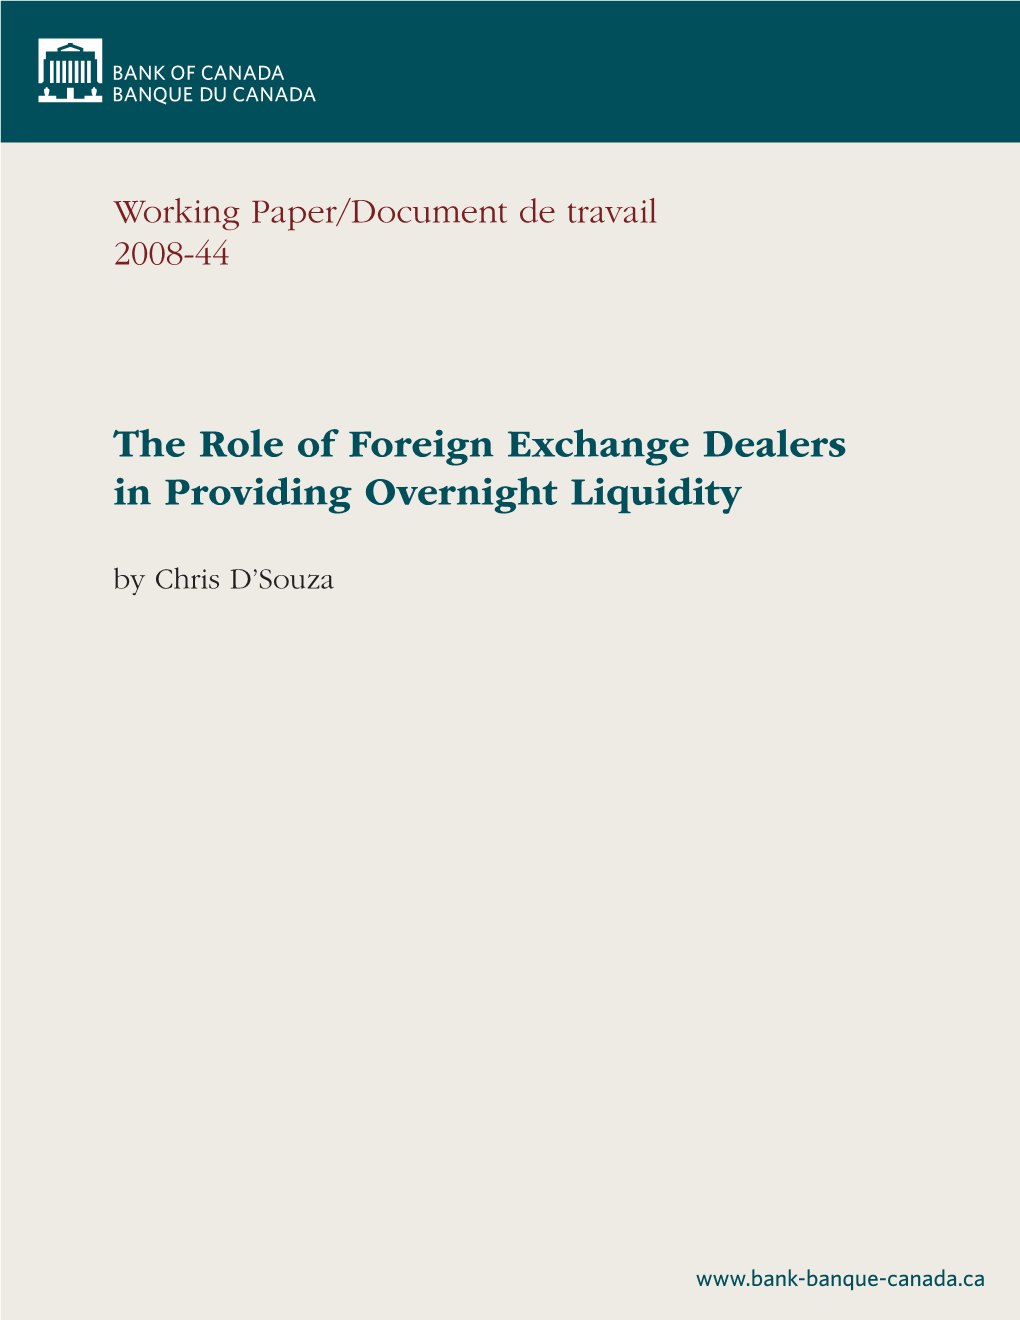 The Role of Foreign Exchange Dealers in Providing Overnight Liquidity by Chris D’Souza